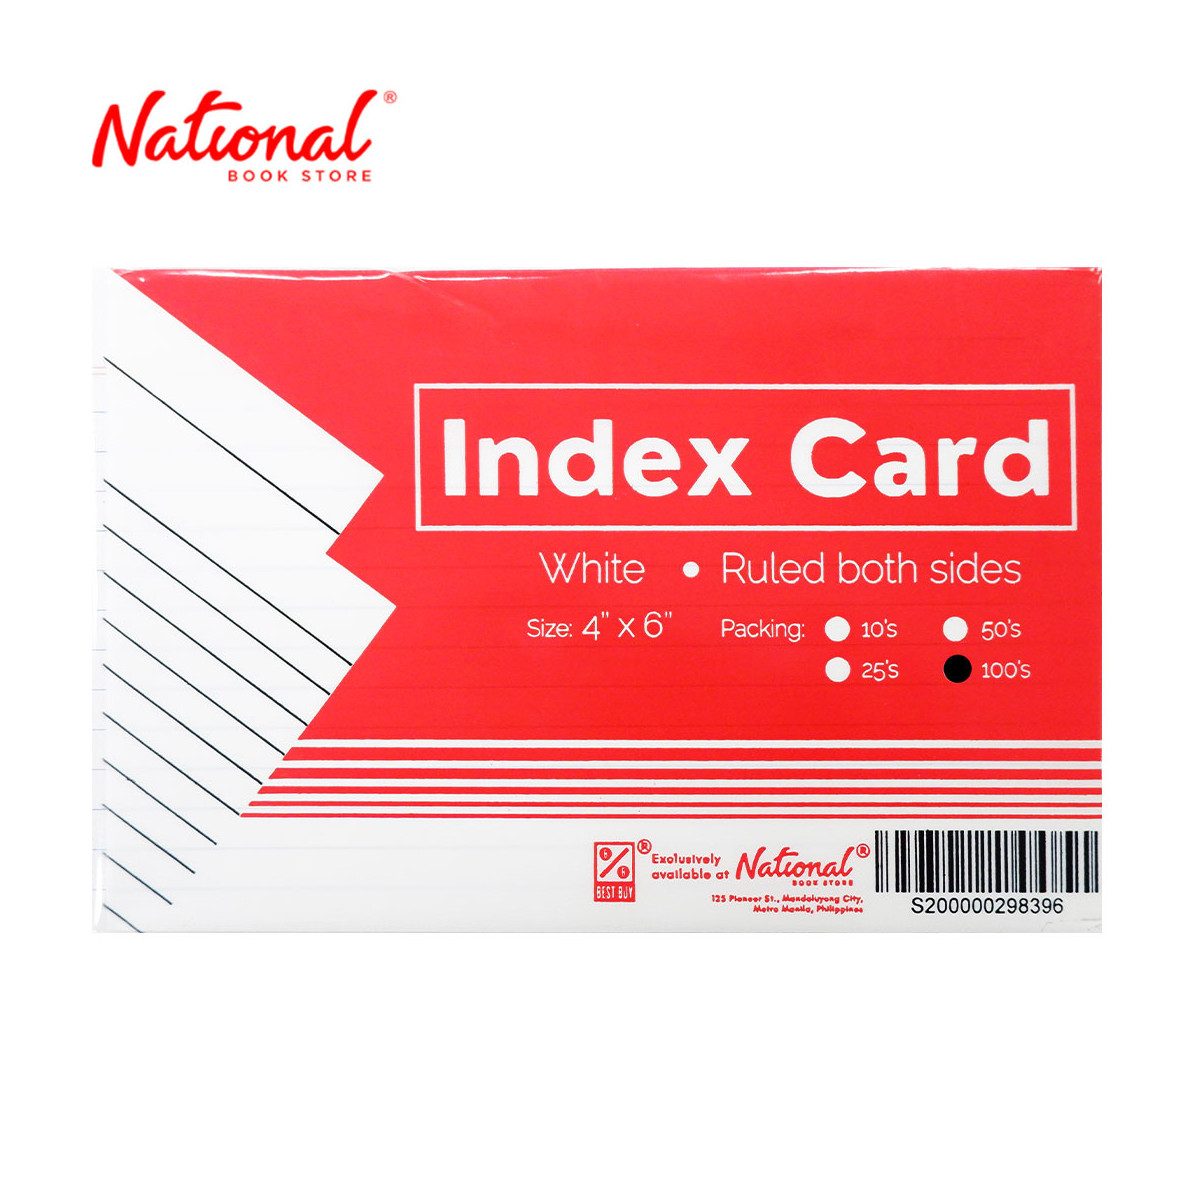 Best Buy Index Card White 4x6 100's Ruled Both Sides - School & Office Supplies